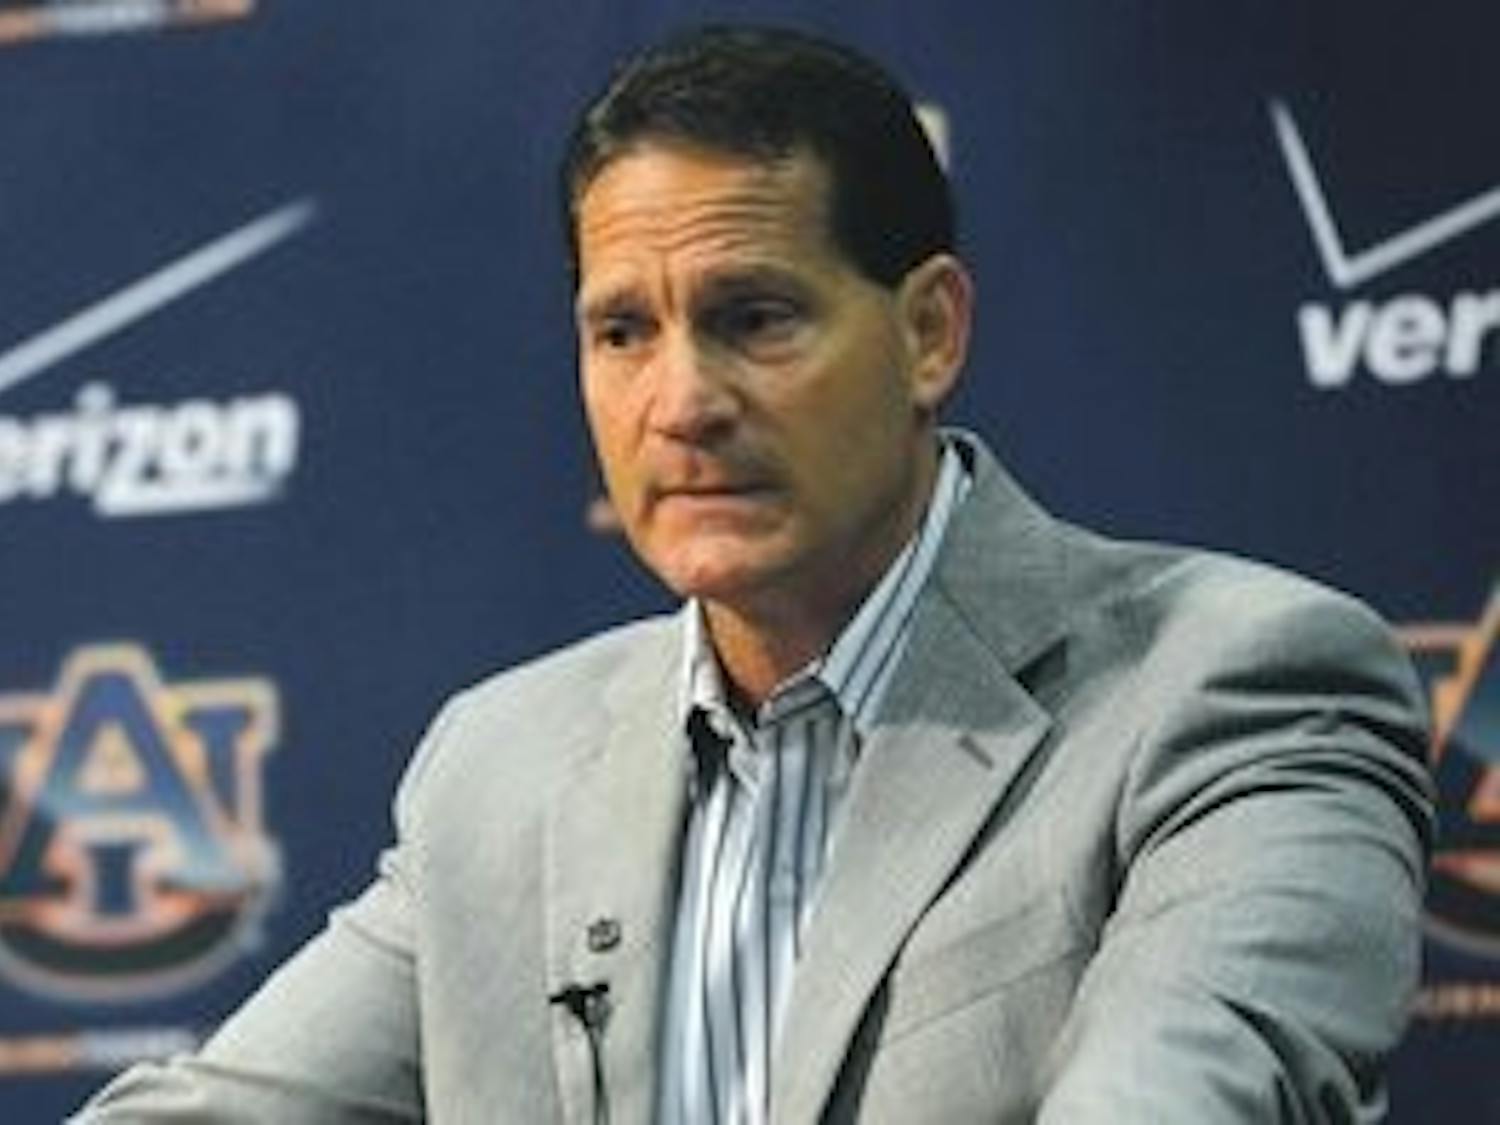 At his Tuesday press conference, Gene Chizik praised the "explosive" Texas A&M offense saying the Aggies "lead the league offensively in just about every category there is." (Courtesy of Todd Van Emst)